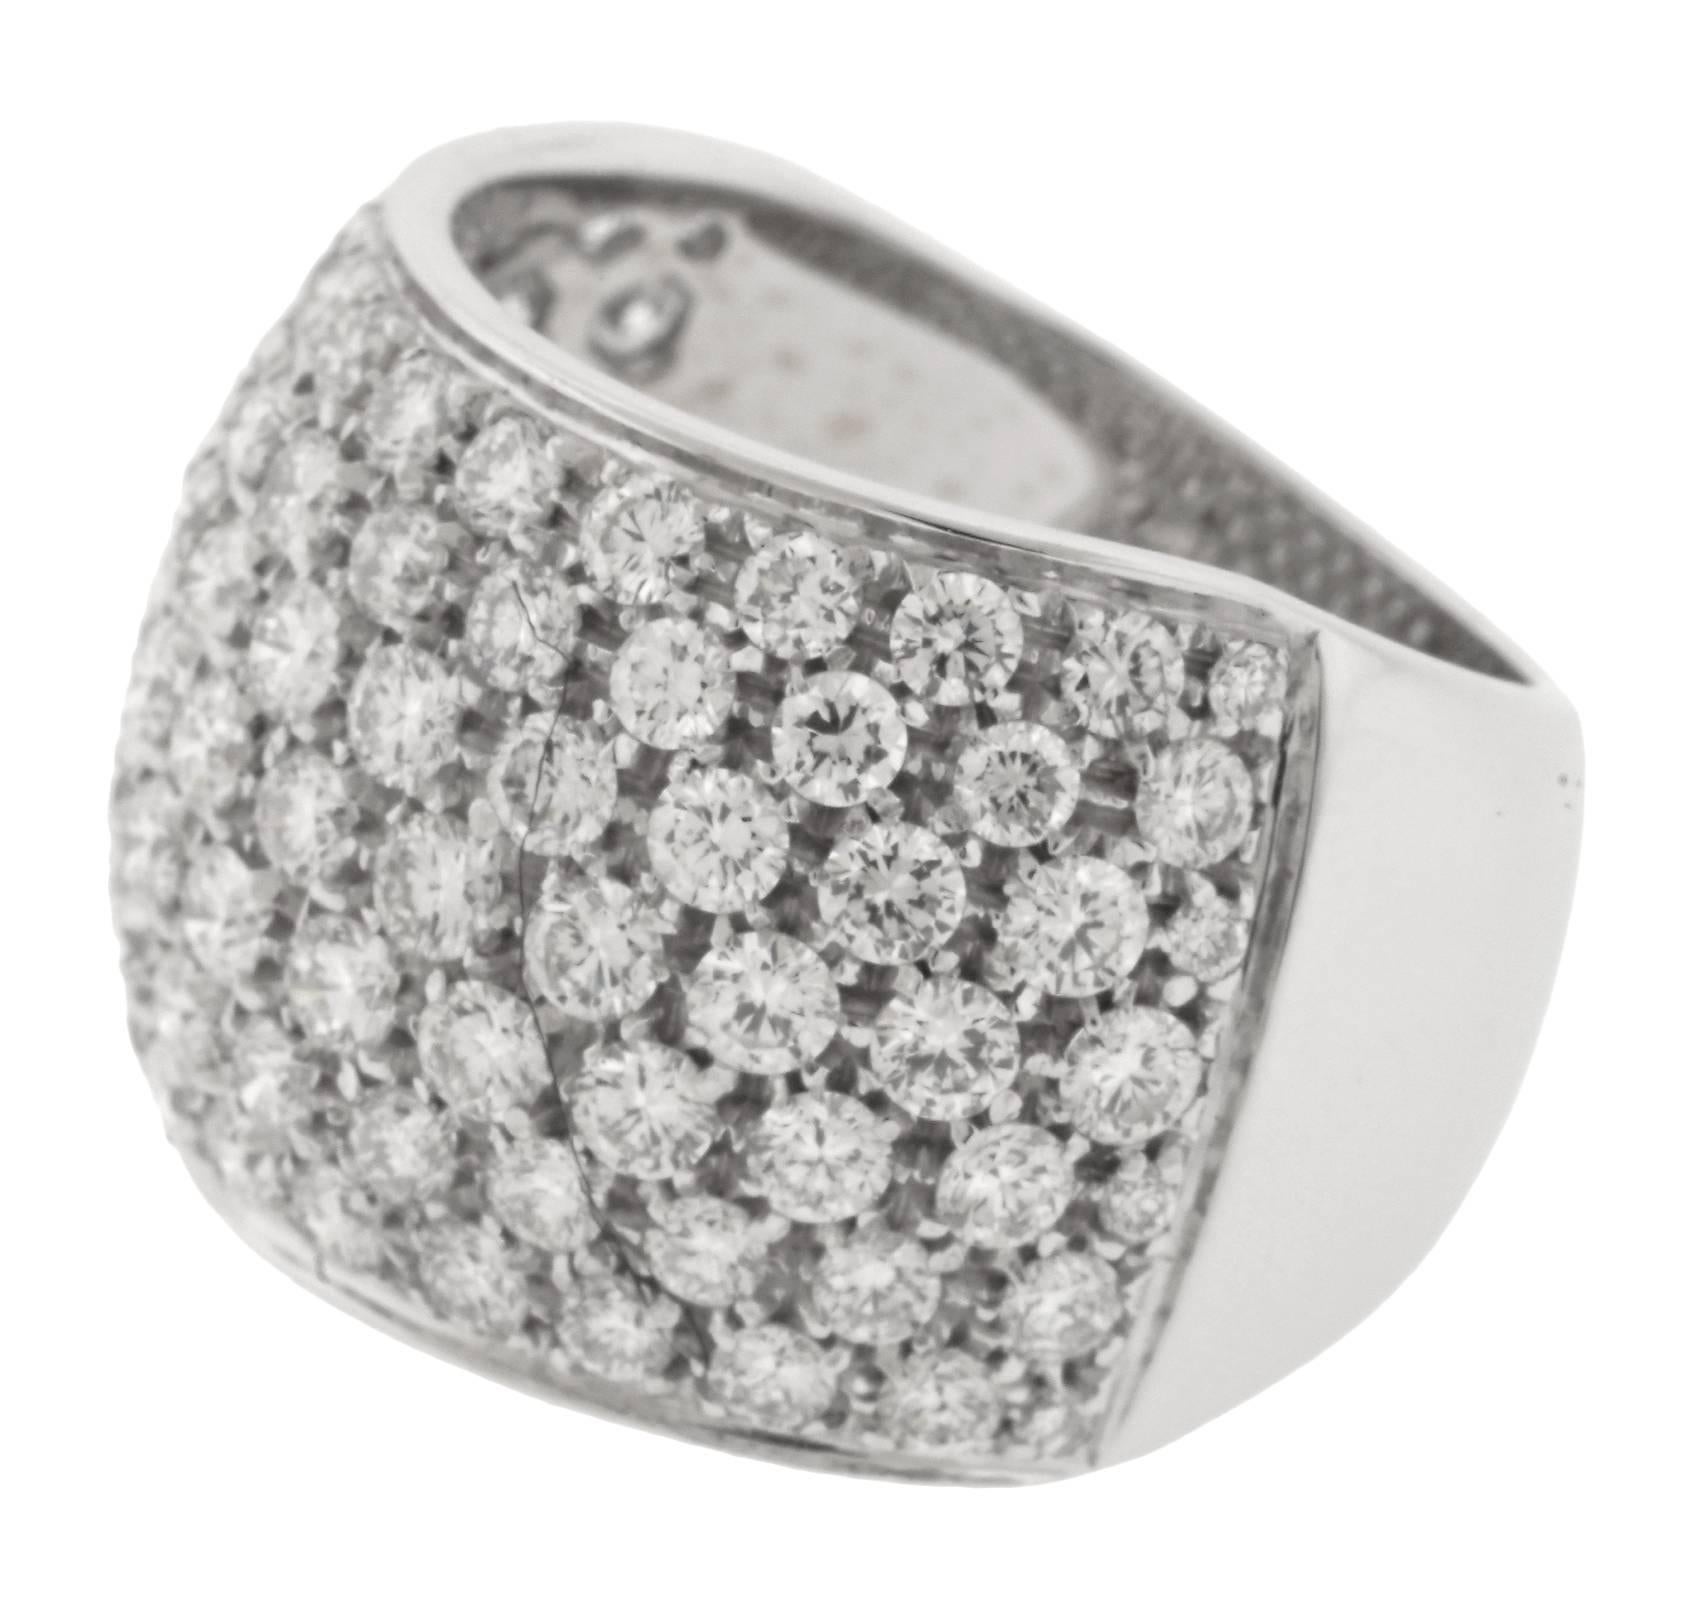 he band is made of 18K white gold and weighs 5.50 DWT (approx. 8.55 grams). It also has 95 round G-color, VS-clarity diamonds weighing 3.25 CTTW.